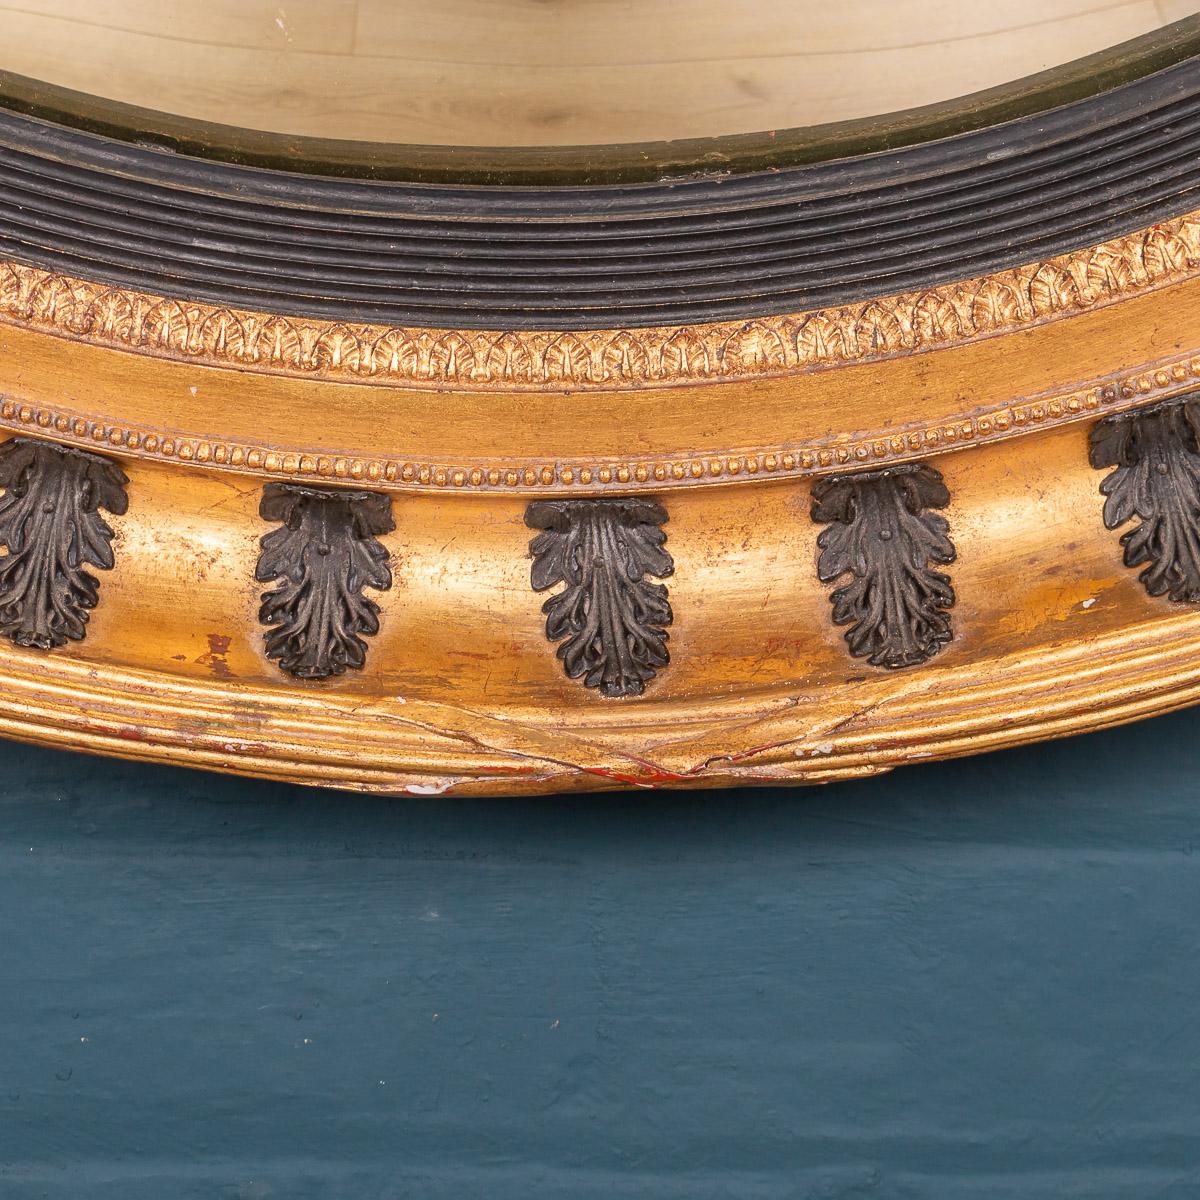 Truly massive convex mirror, with gilt frame and applied black acanthus leaves, late 20th century, reputedly retailed by Harrods, London. Convex mirrors played an important role in the running of the Regency household. Often placed in the dining